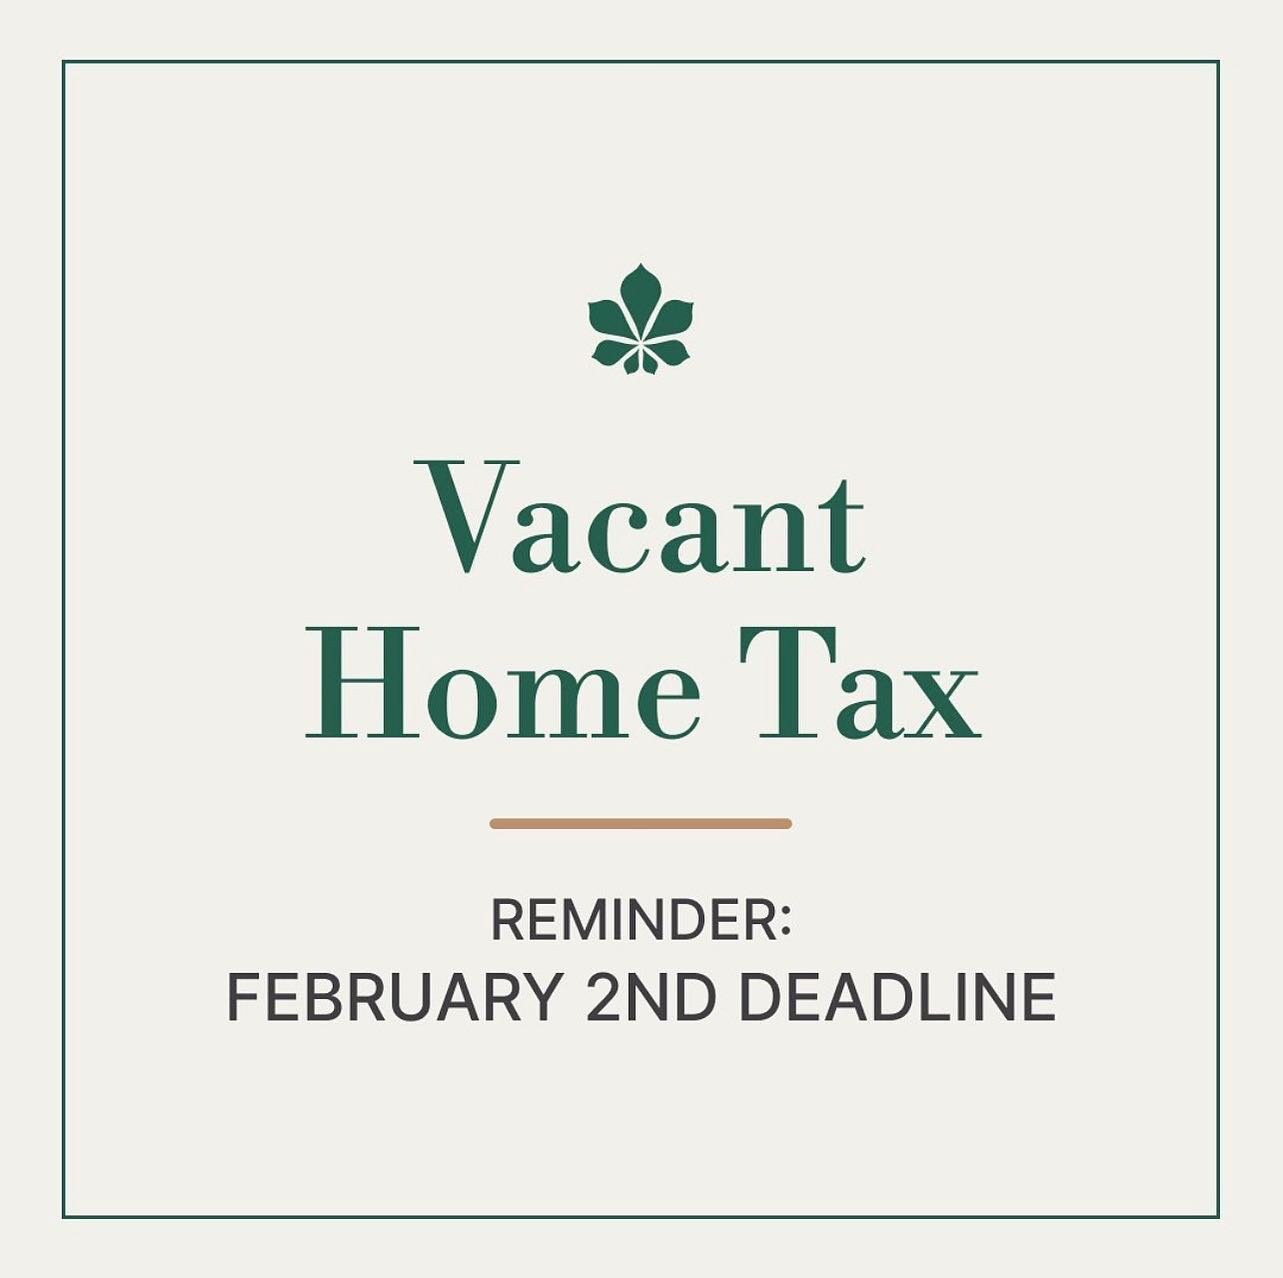 Do you know about the Vacant Home Tax? The deadline to declare is just days away. 

All residential property owners in Toronto will be required to submit a declaration of their property&rsquo;s occupancy status for the previous year, even if they liv